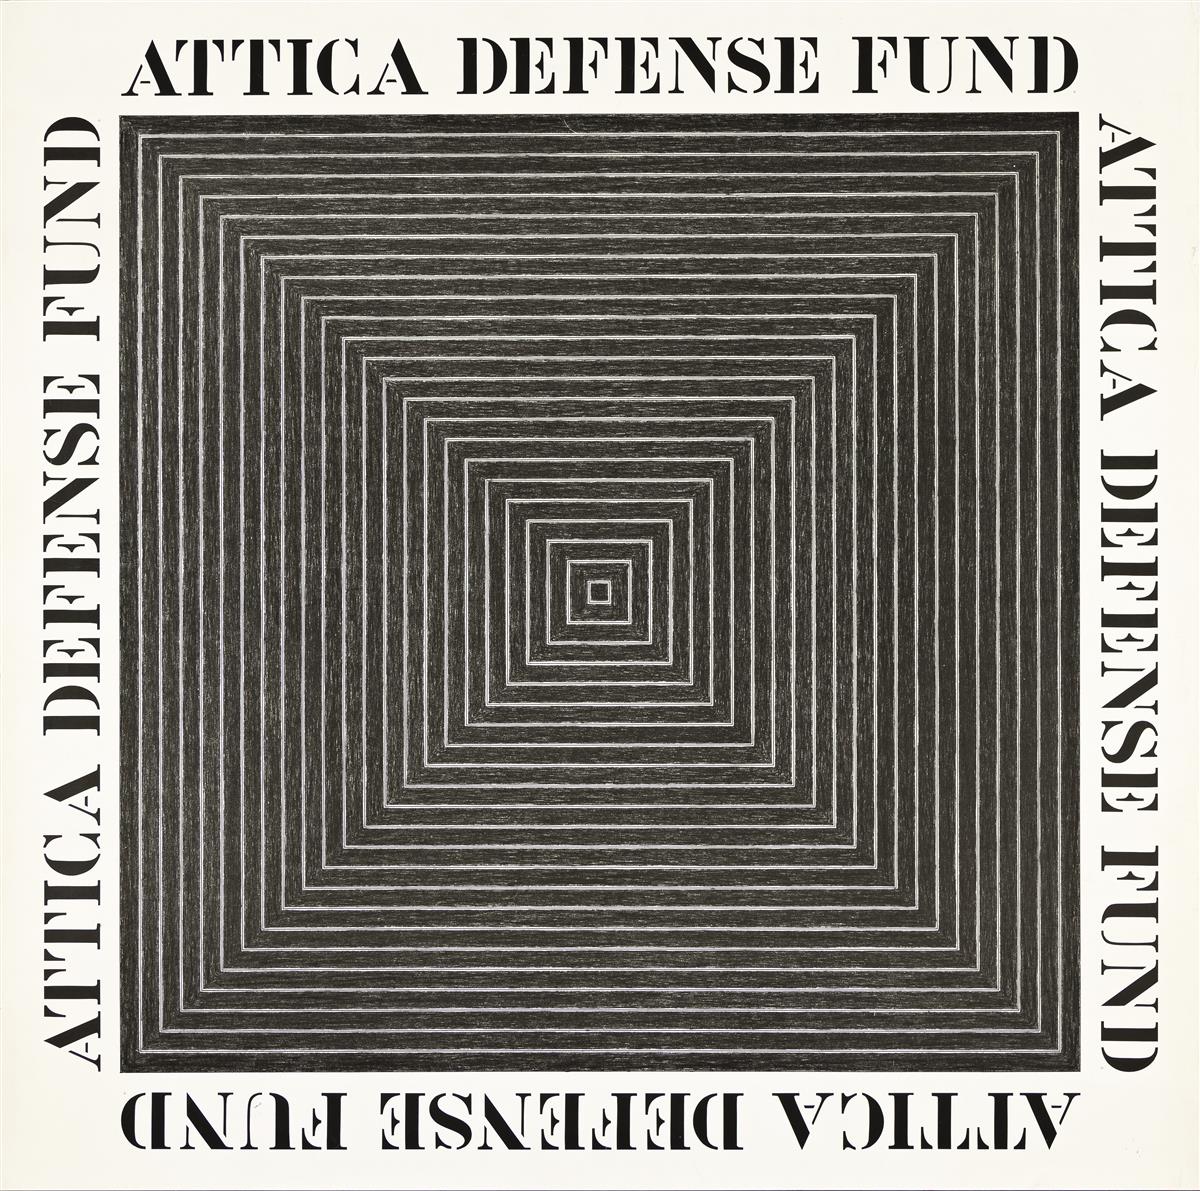 A poster of a black and white square made up of smaller squares surrounded by text, 'Attica Defense Fund.'